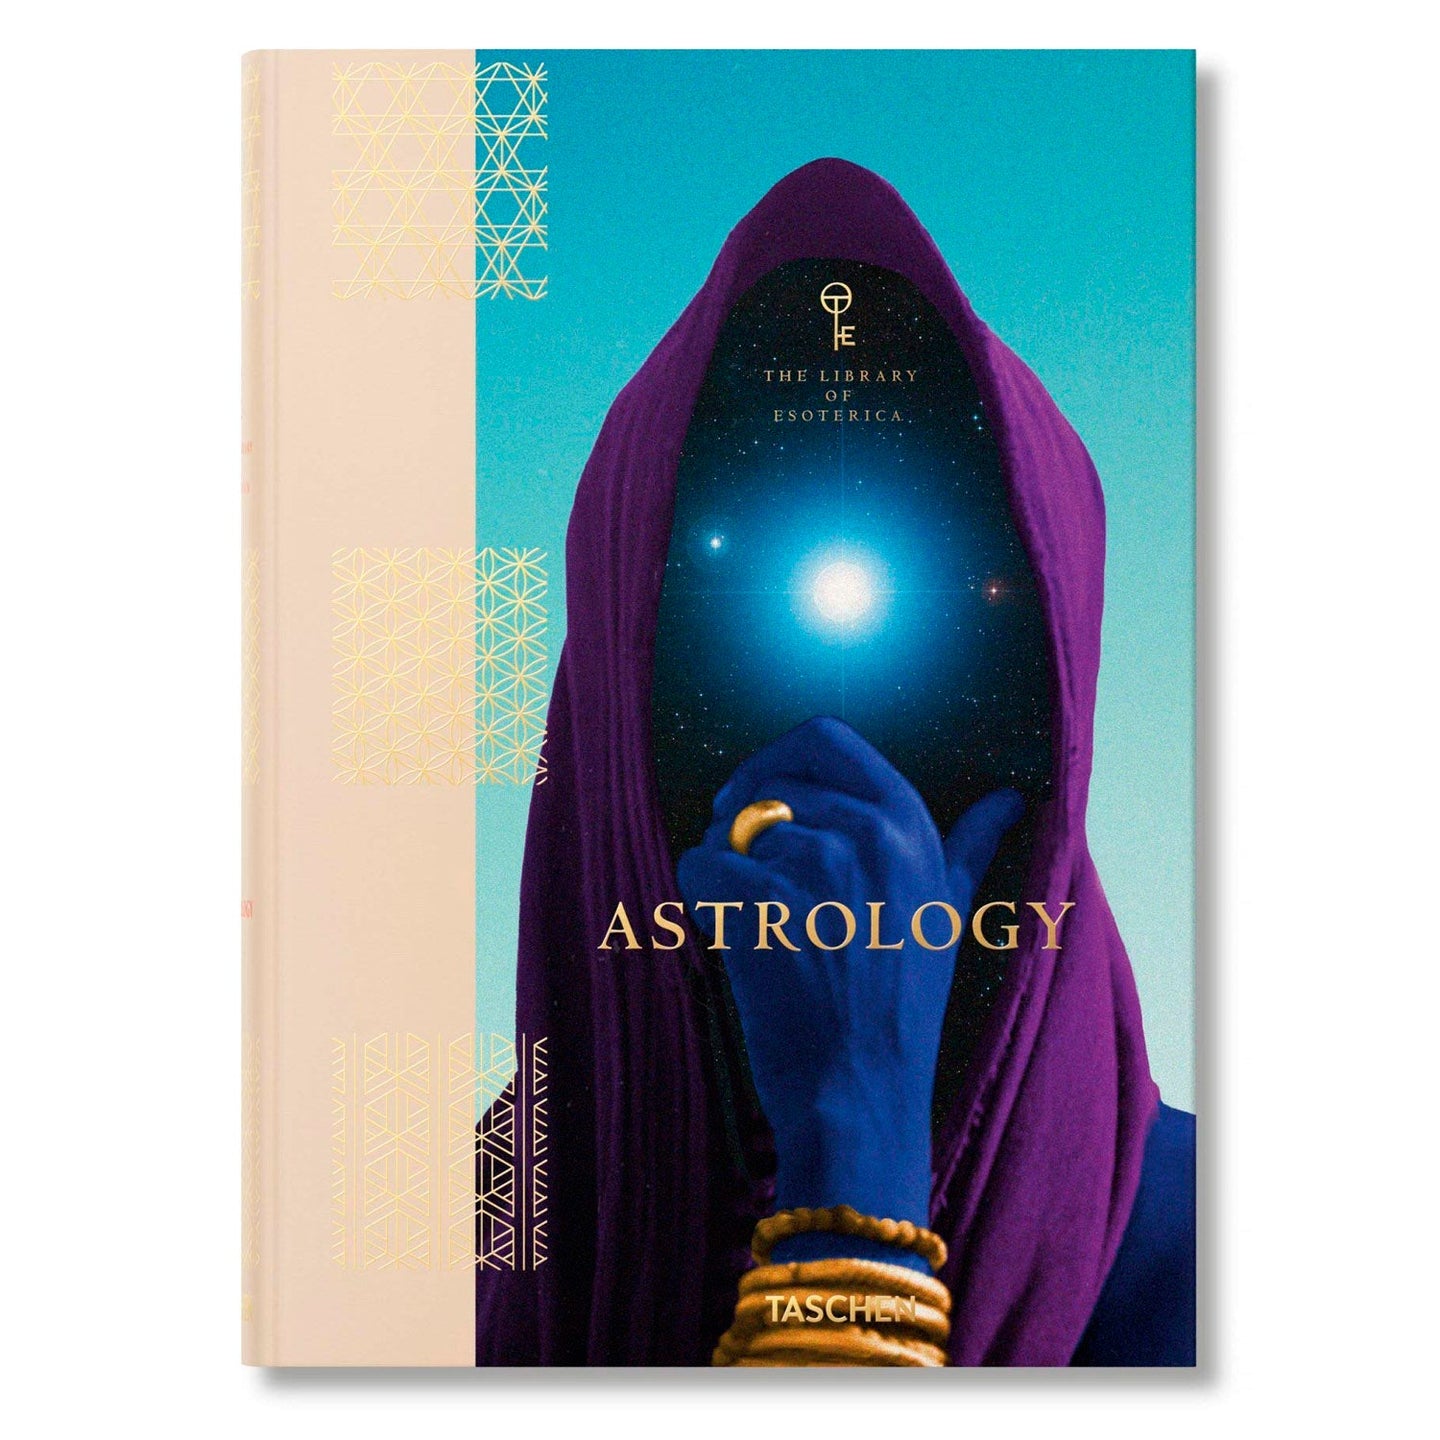 Astrology I The Library of Esoterica